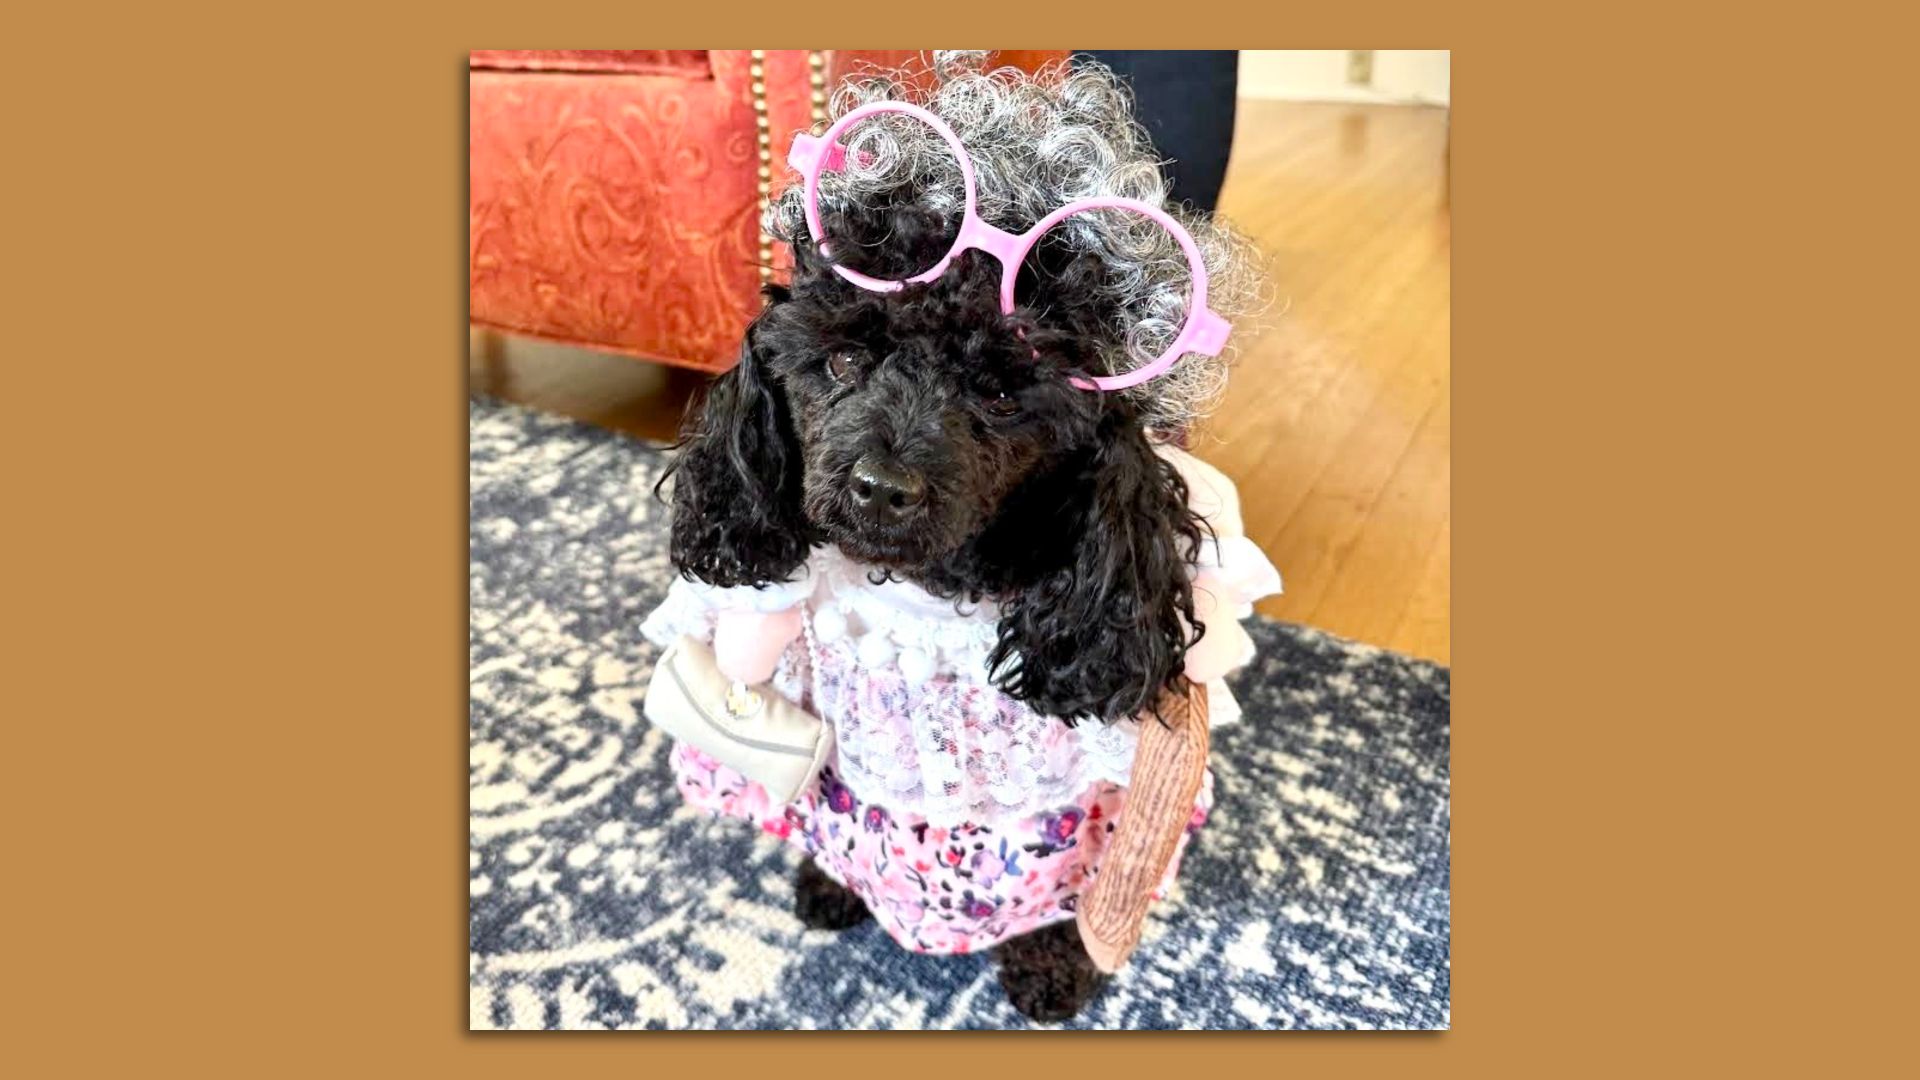 A black dog with curly hair and soft wears wears a frilly dress, pink glasses, gray wig and holds a purse.